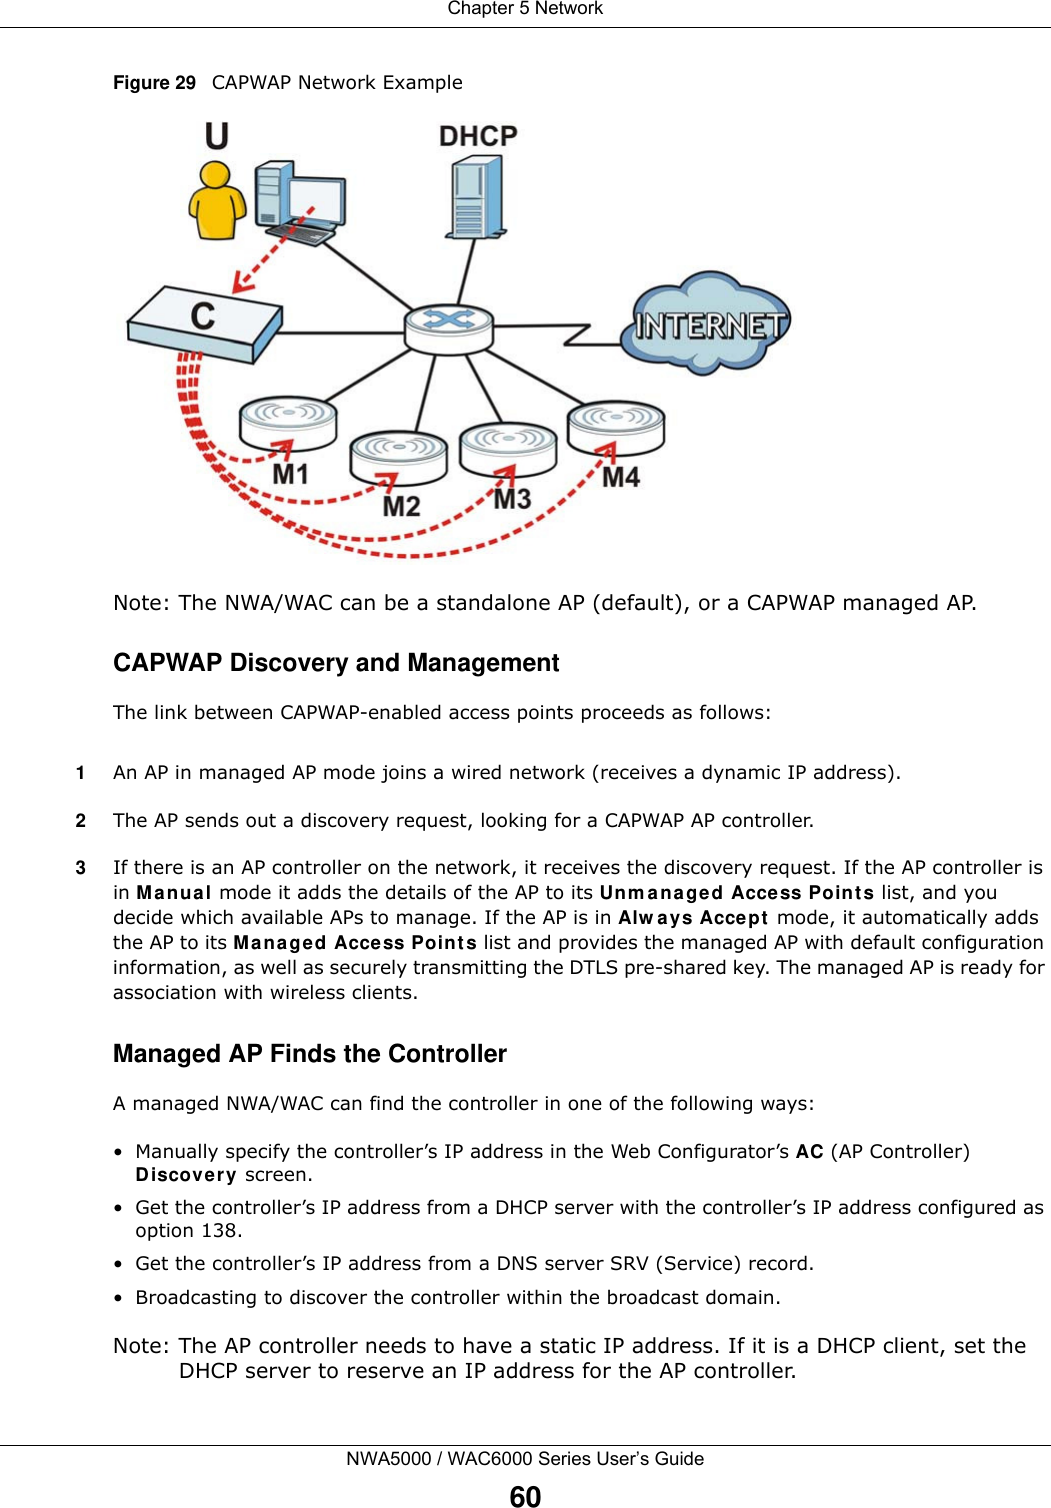 Chapter 5 NetworkNWA5000 / WAC6000 Series User’s Guide60Figure 29   CAPWAP Network ExampleNote: The NWA/WAC can be a standalone AP (default), or a CAPWAP managed AP.CAPWAP Discovery and ManagementThe link between CAPWAP-enabled access points proceeds as follows:1An AP in managed AP mode joins a wired network (receives a dynamic IP address).2The AP sends out a discovery request, looking for a CAPWAP AP controller.3If there is an AP controller on the network, it receives the discovery request. If the AP controller is in Ma nua l mode it adds the details of the AP to its Unm a na ged Access Poin ts list, and you decide which available APs to manage. If the AP is in Alw a ys Accept  mode, it automatically adds the AP to its Ma nage d Access Points list and provides the managed AP with default configuration information, as well as securely transmitting the DTLS pre-shared key. The managed AP is ready for association with wireless clients.Managed AP Finds the ControllerA managed NWA/WAC can find the controller in one of the following ways:• Manually specify the controller’s IP address in the Web Configurator’s AC (AP Controller) Discover y screen. • Get the controller’s IP address from a DHCP server with the controller’s IP address configured as option 138.• Get the controller’s IP address from a DNS server SRV (Service) record.• Broadcasting to discover the controller within the broadcast domain.Note: The AP controller needs to have a static IP address. If it is a DHCP client, set the DHCP server to reserve an IP address for the AP controller.